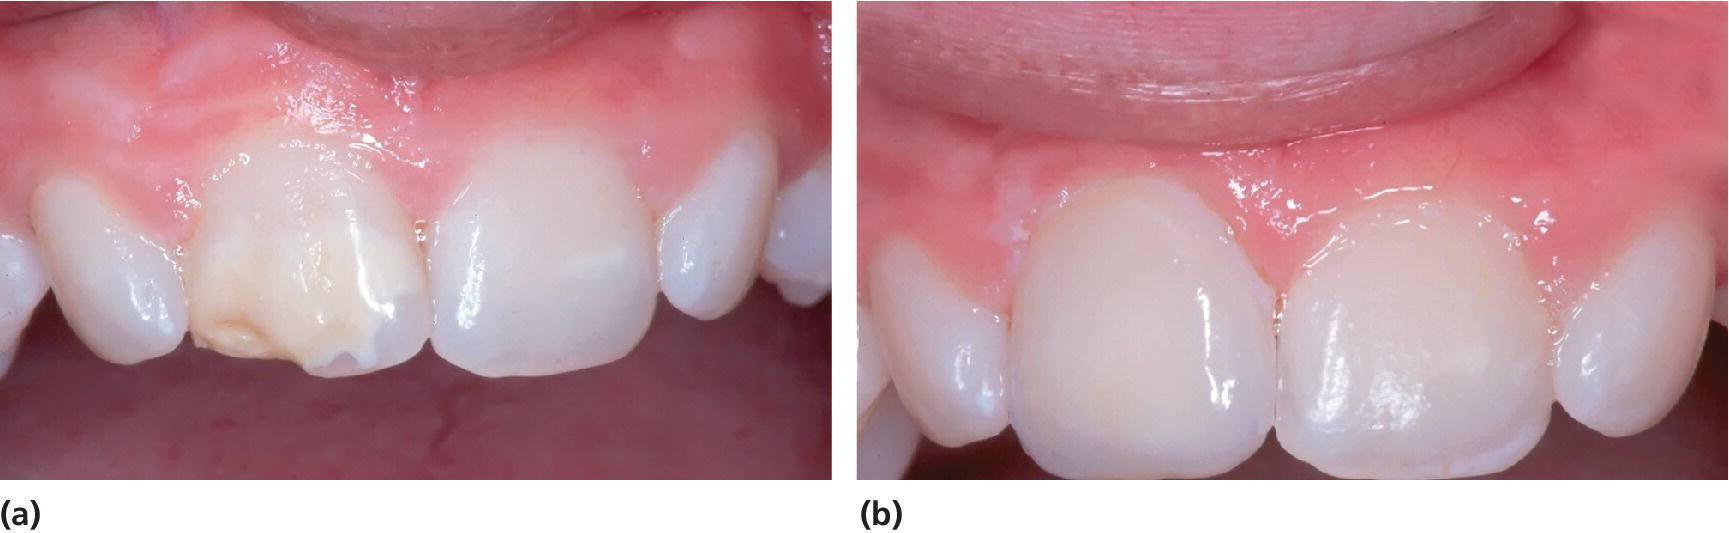 2 Photos displaying upper incisors and gums of a 13-year-old boy with MIH (left) and the same teeth with enamel disintegration on the upper left central incisor restored with porcelain veneer (right).